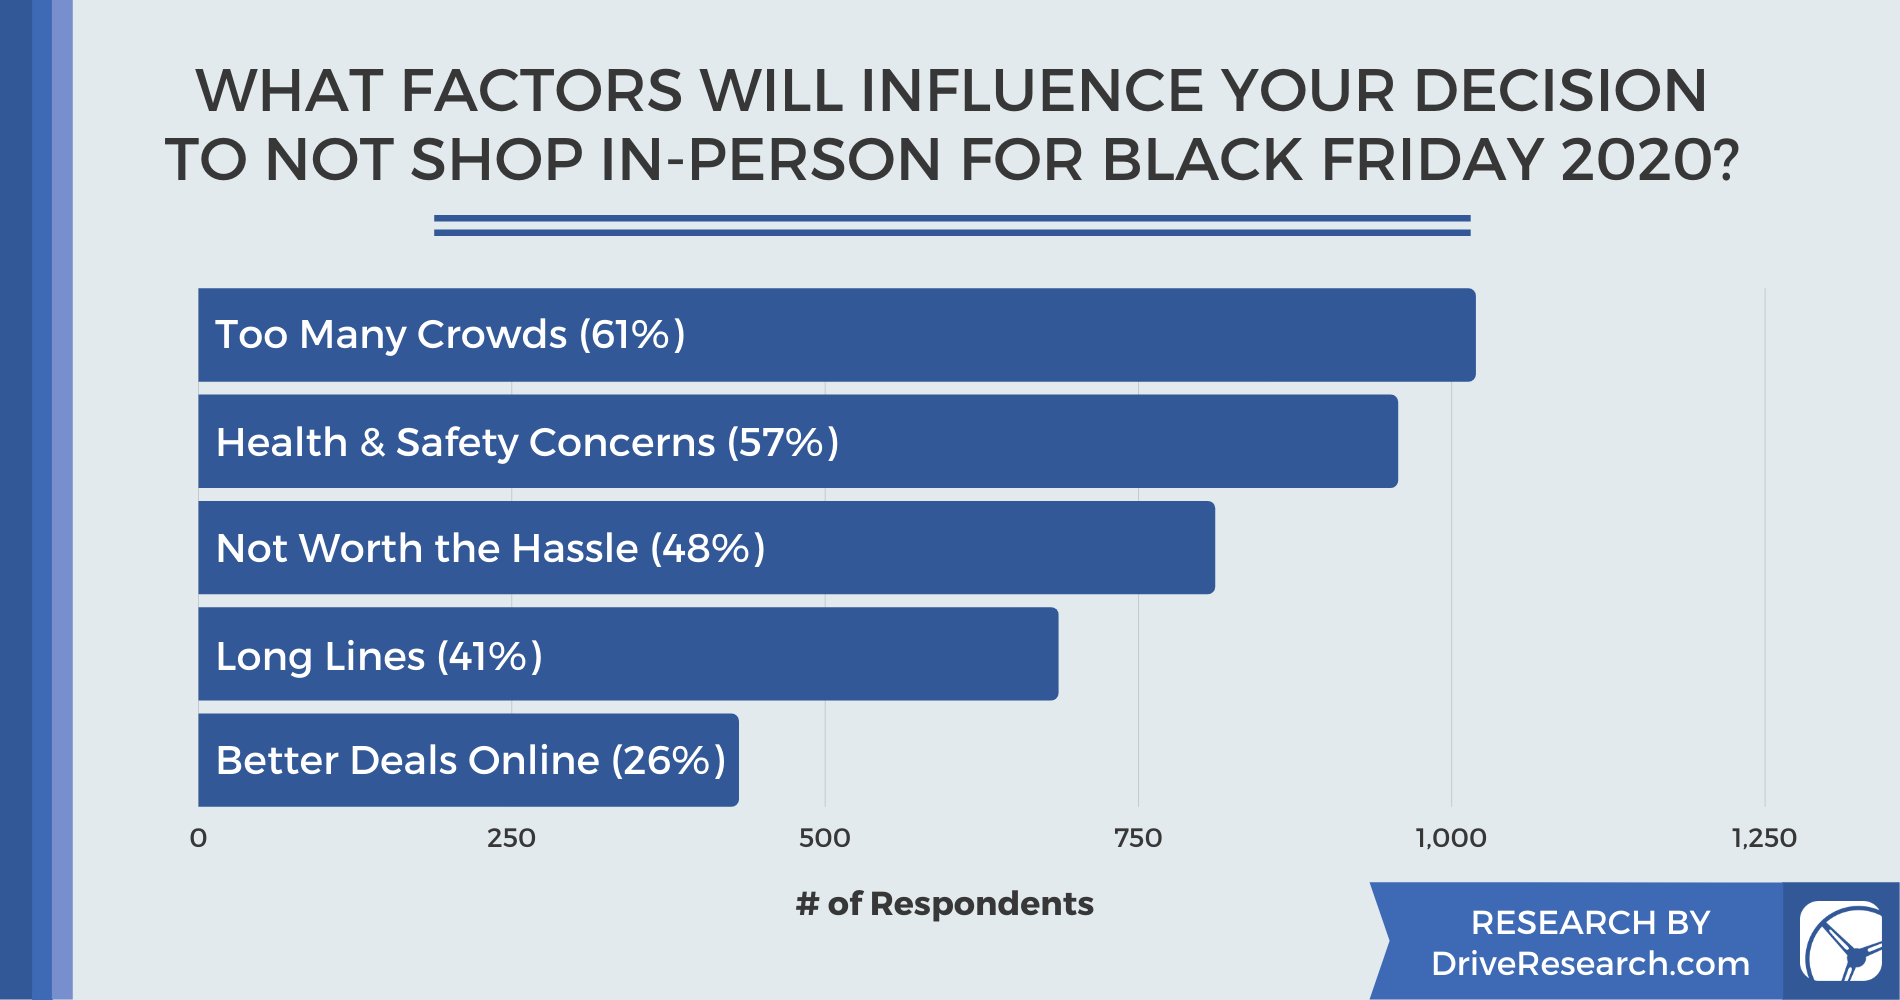 Black Friday 2020: eCommerce Sites Can Expect a 28% Increase in Online Shopping from 2019